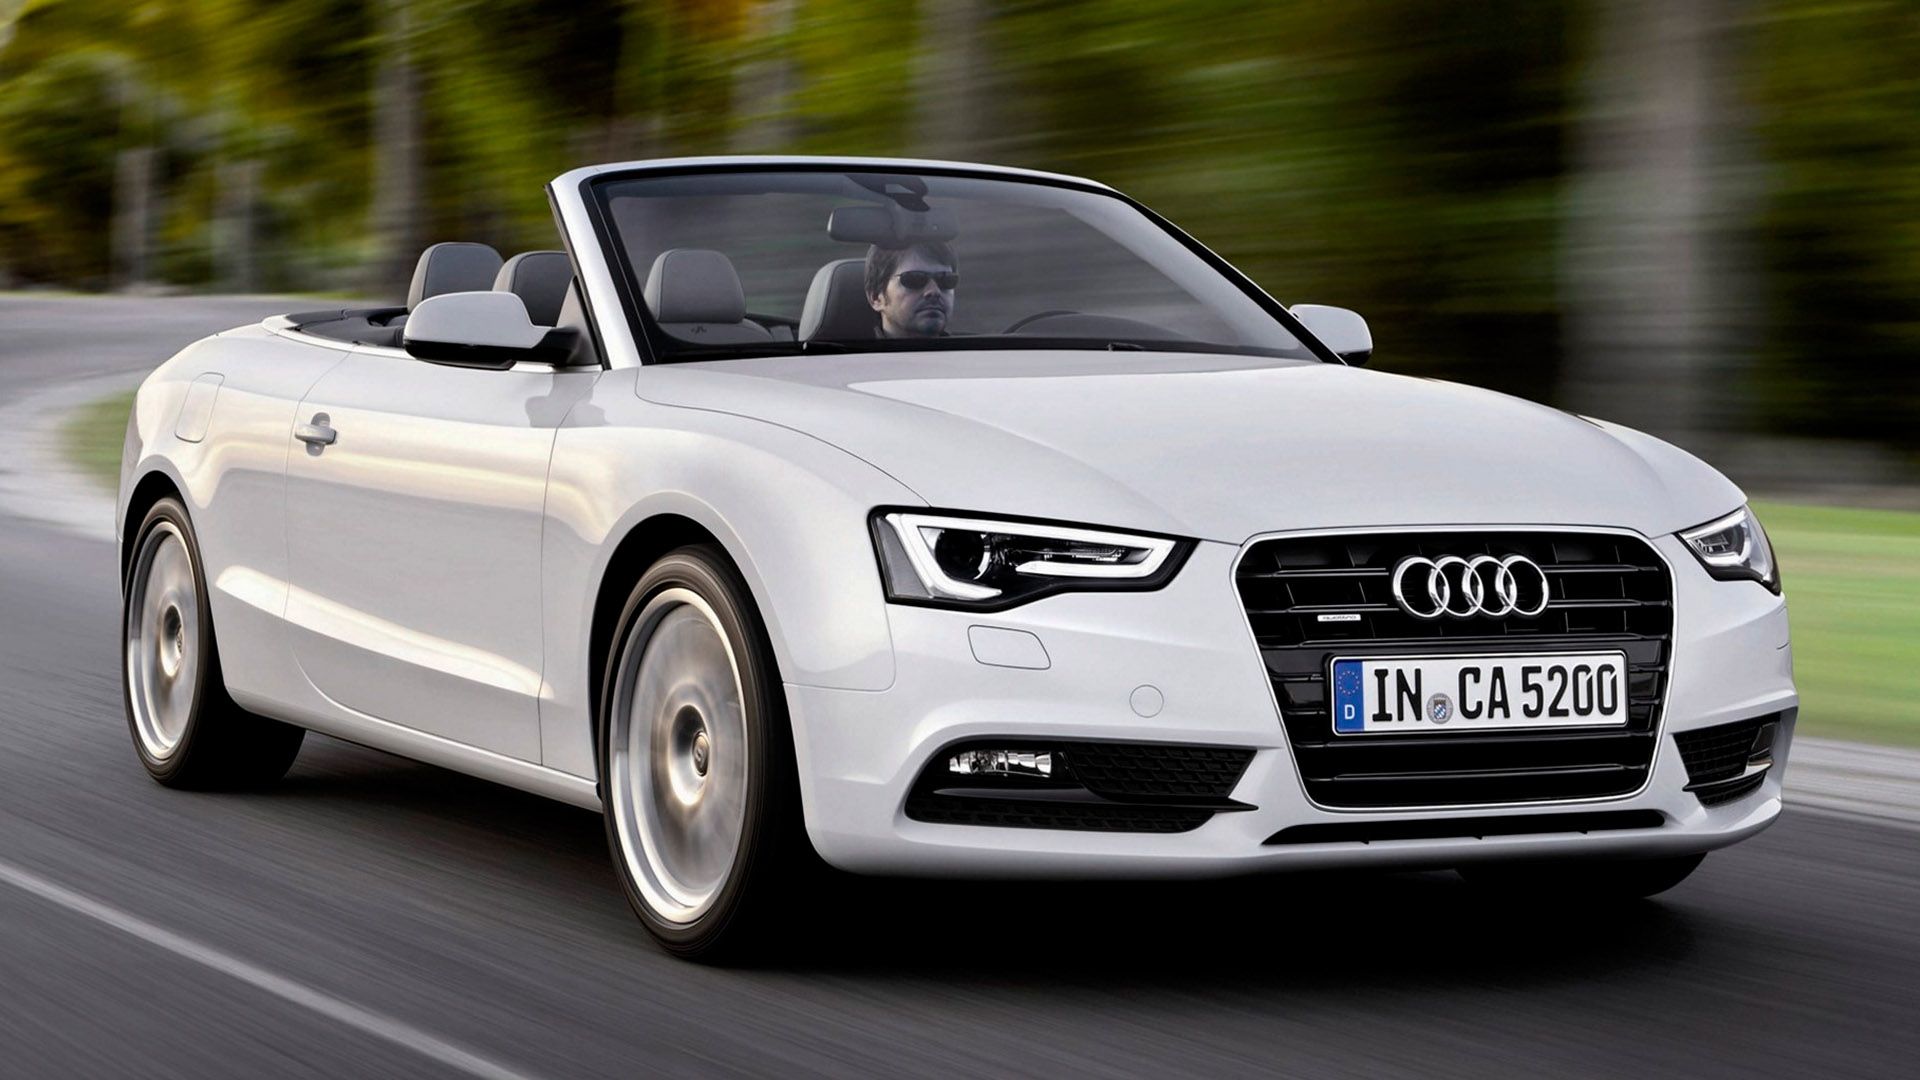 A man with sunglasses sits in an open-top Audi A5 convertible and drives along a country road